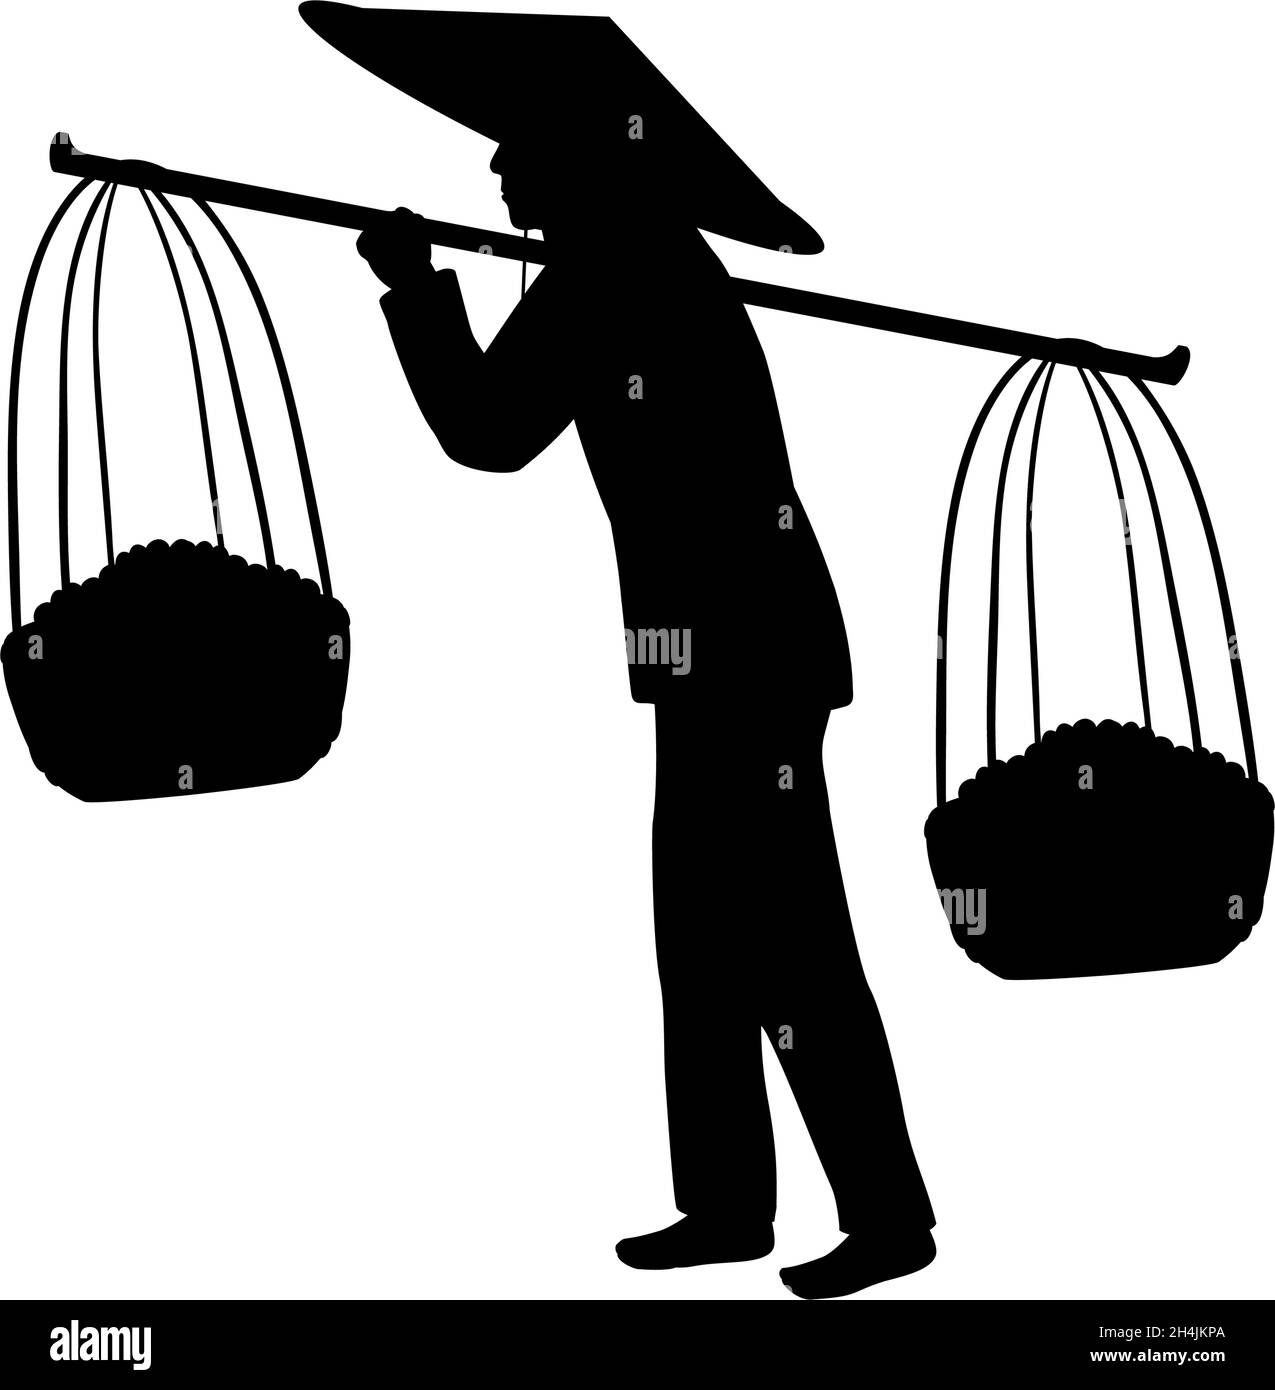 Silhouette Asian farmer carrying baskets. Stock Vector